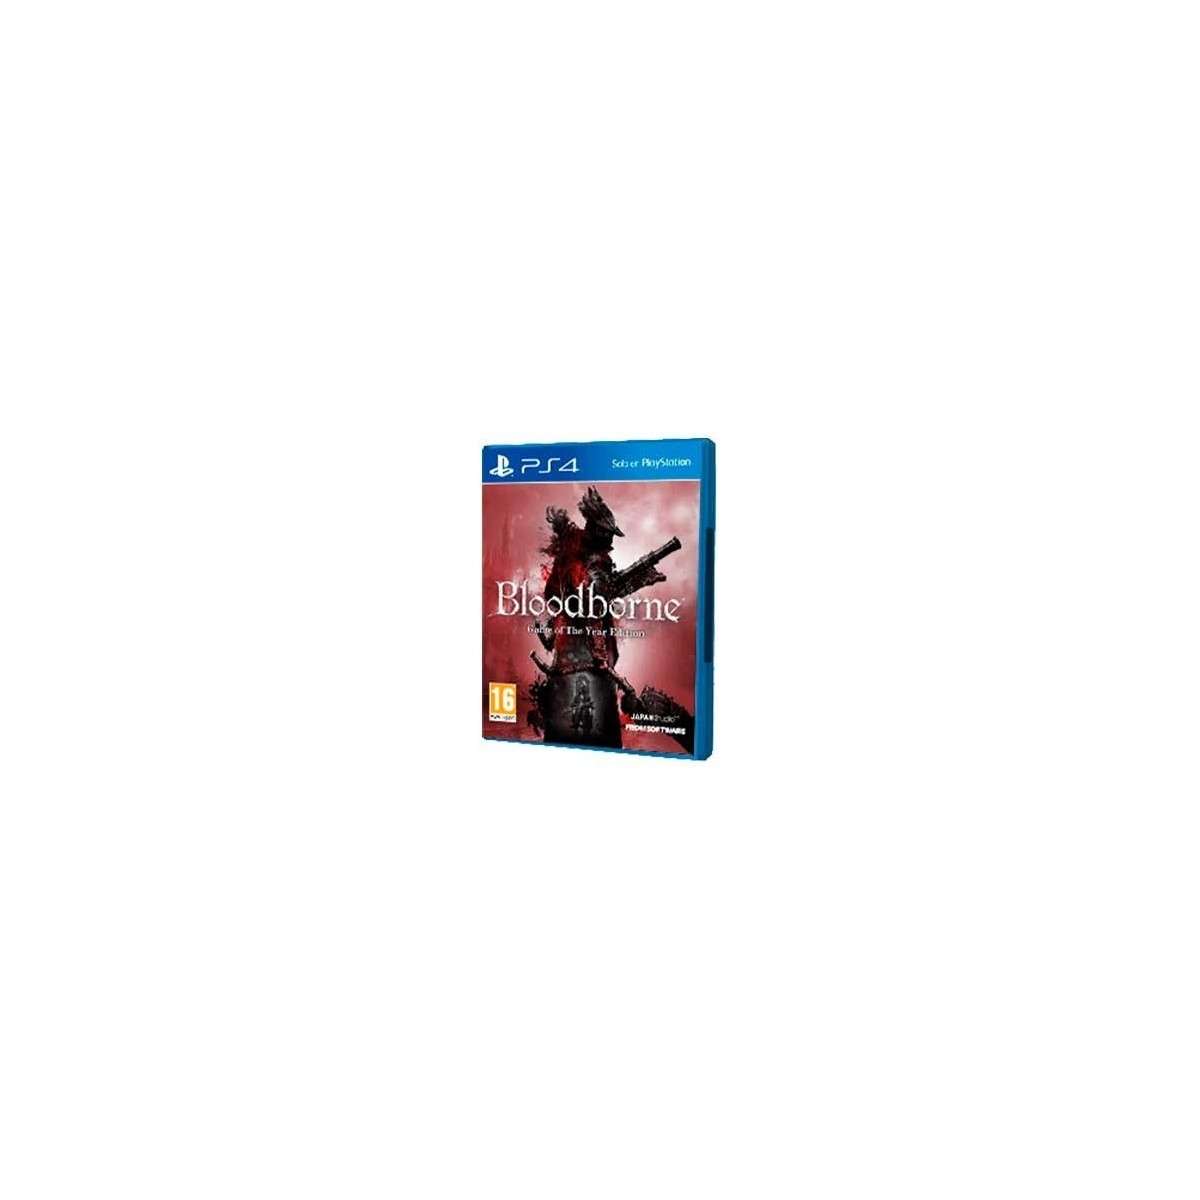 Bloodborne GOTY PS4 Brand New Factory Sealed Game of the Year PlayStation 4